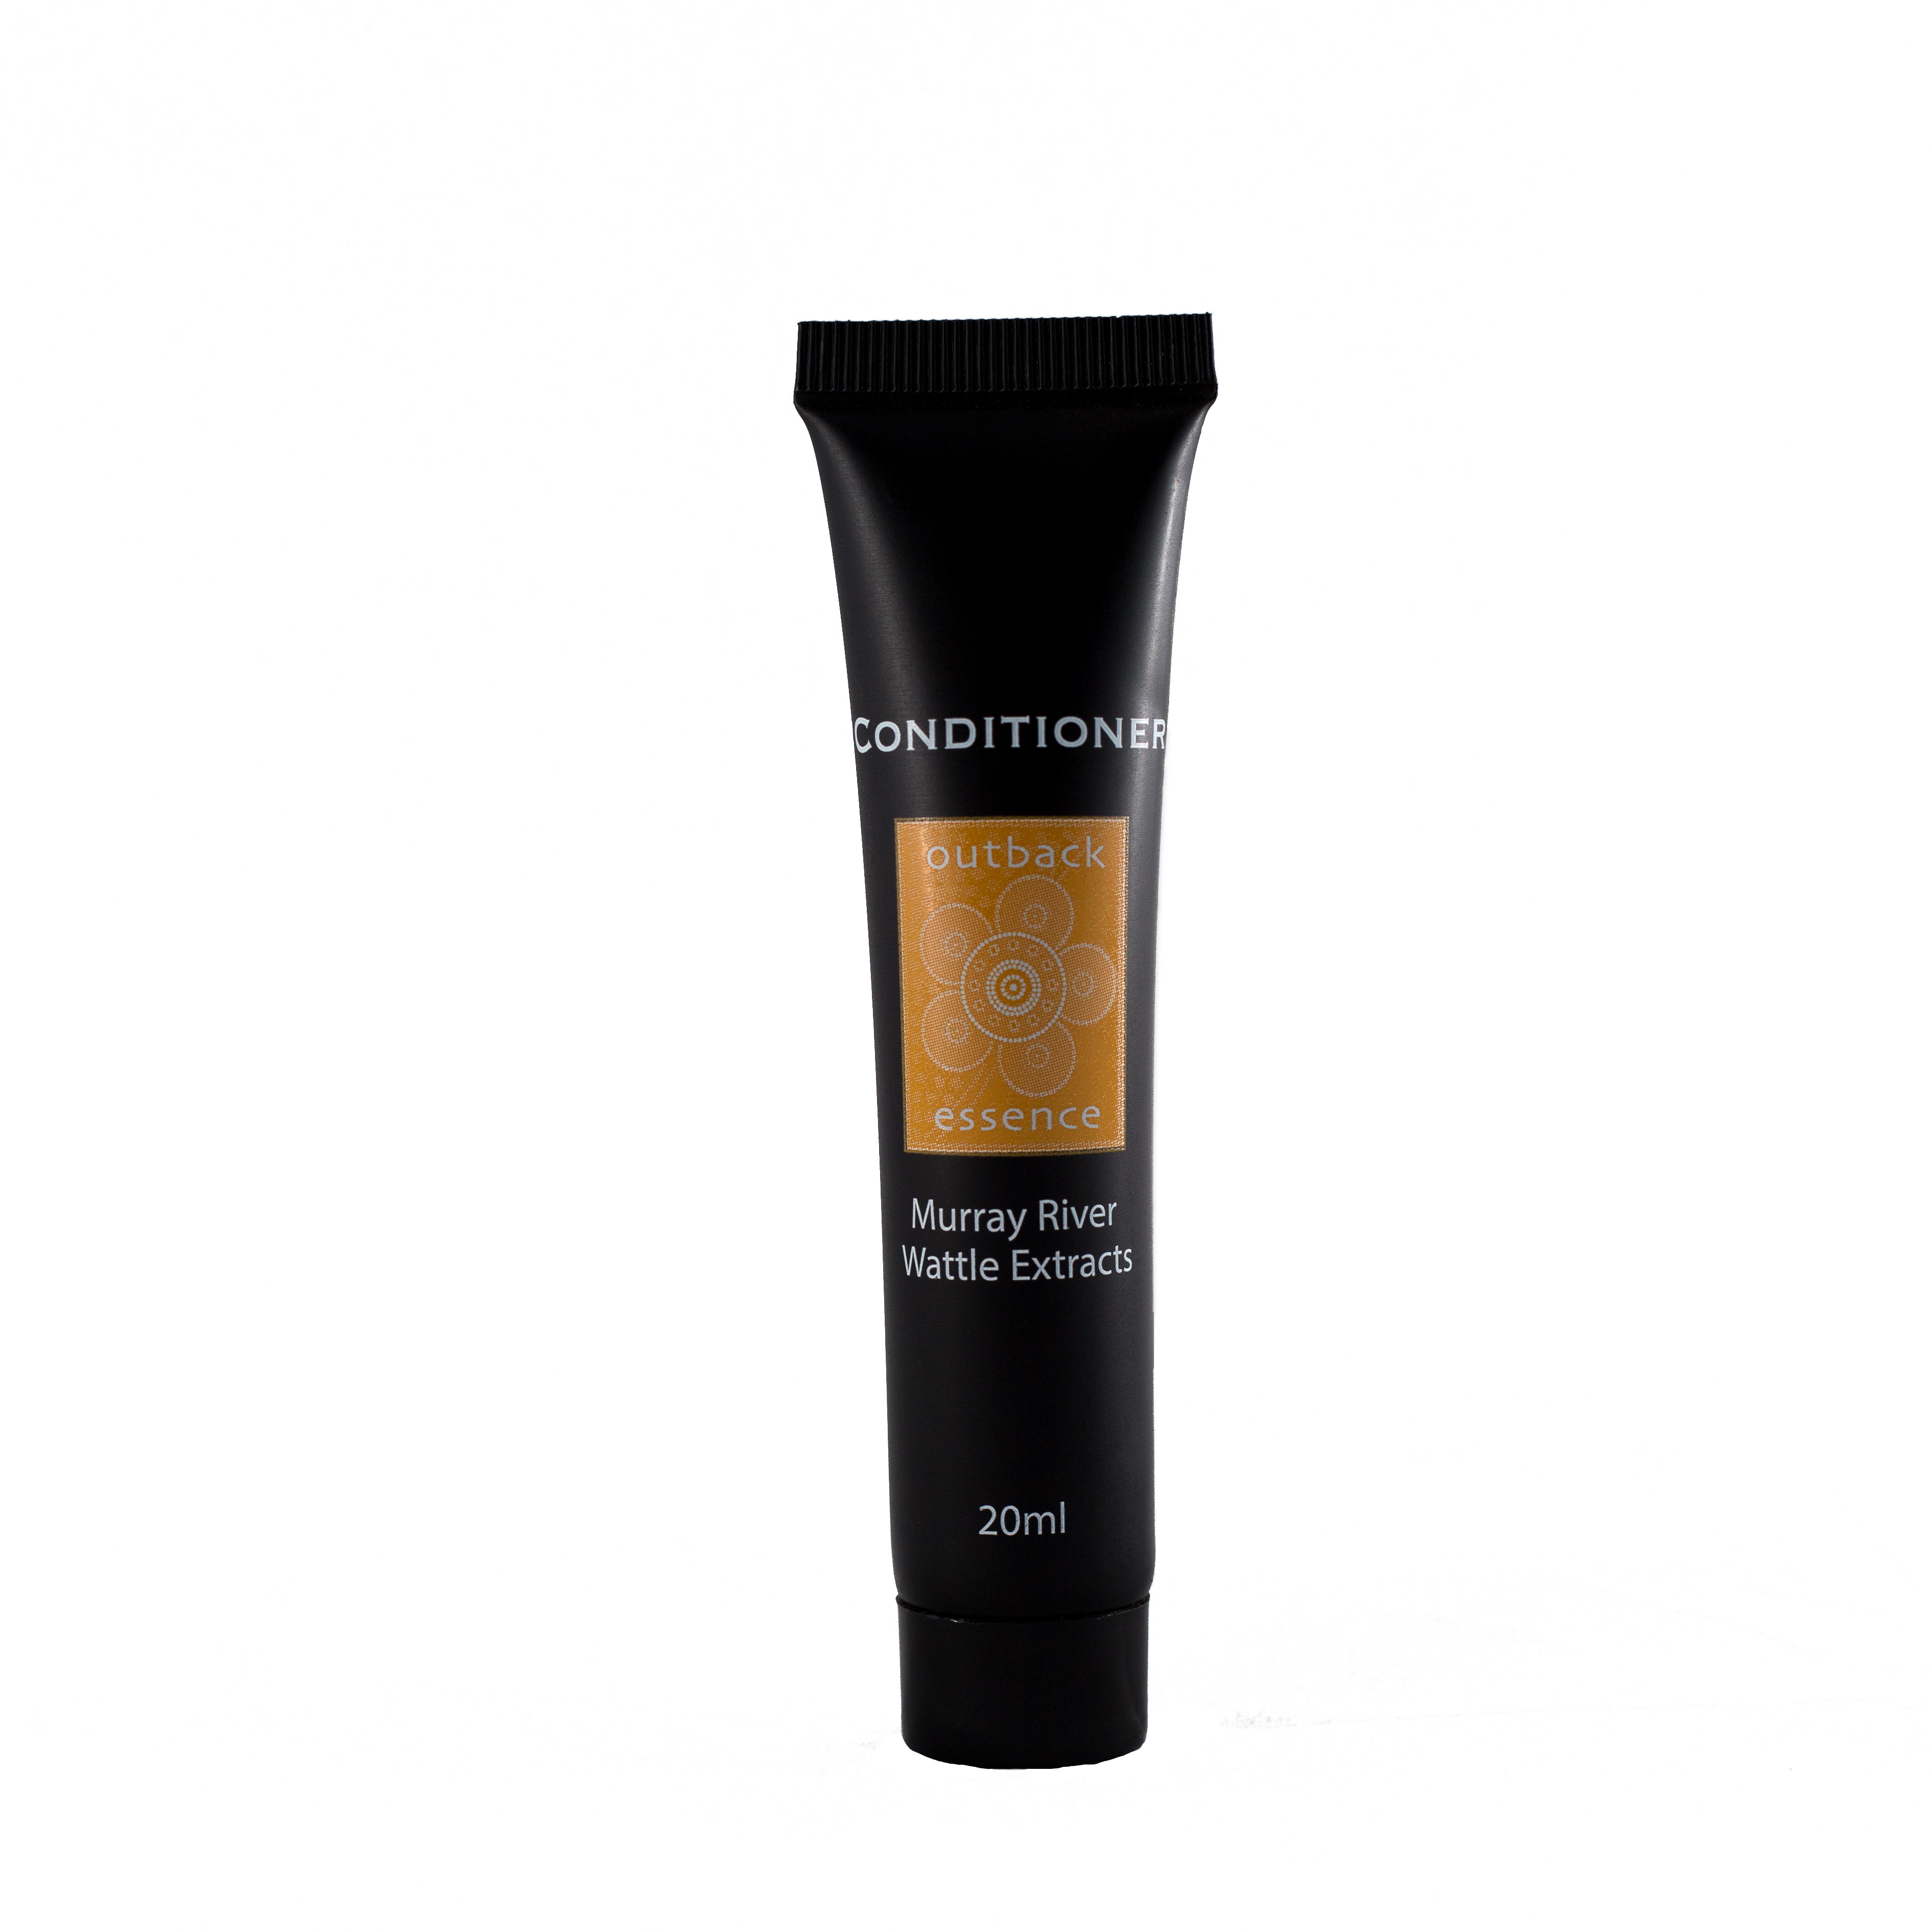 OUTBACK ESSENCE CONDITIONER